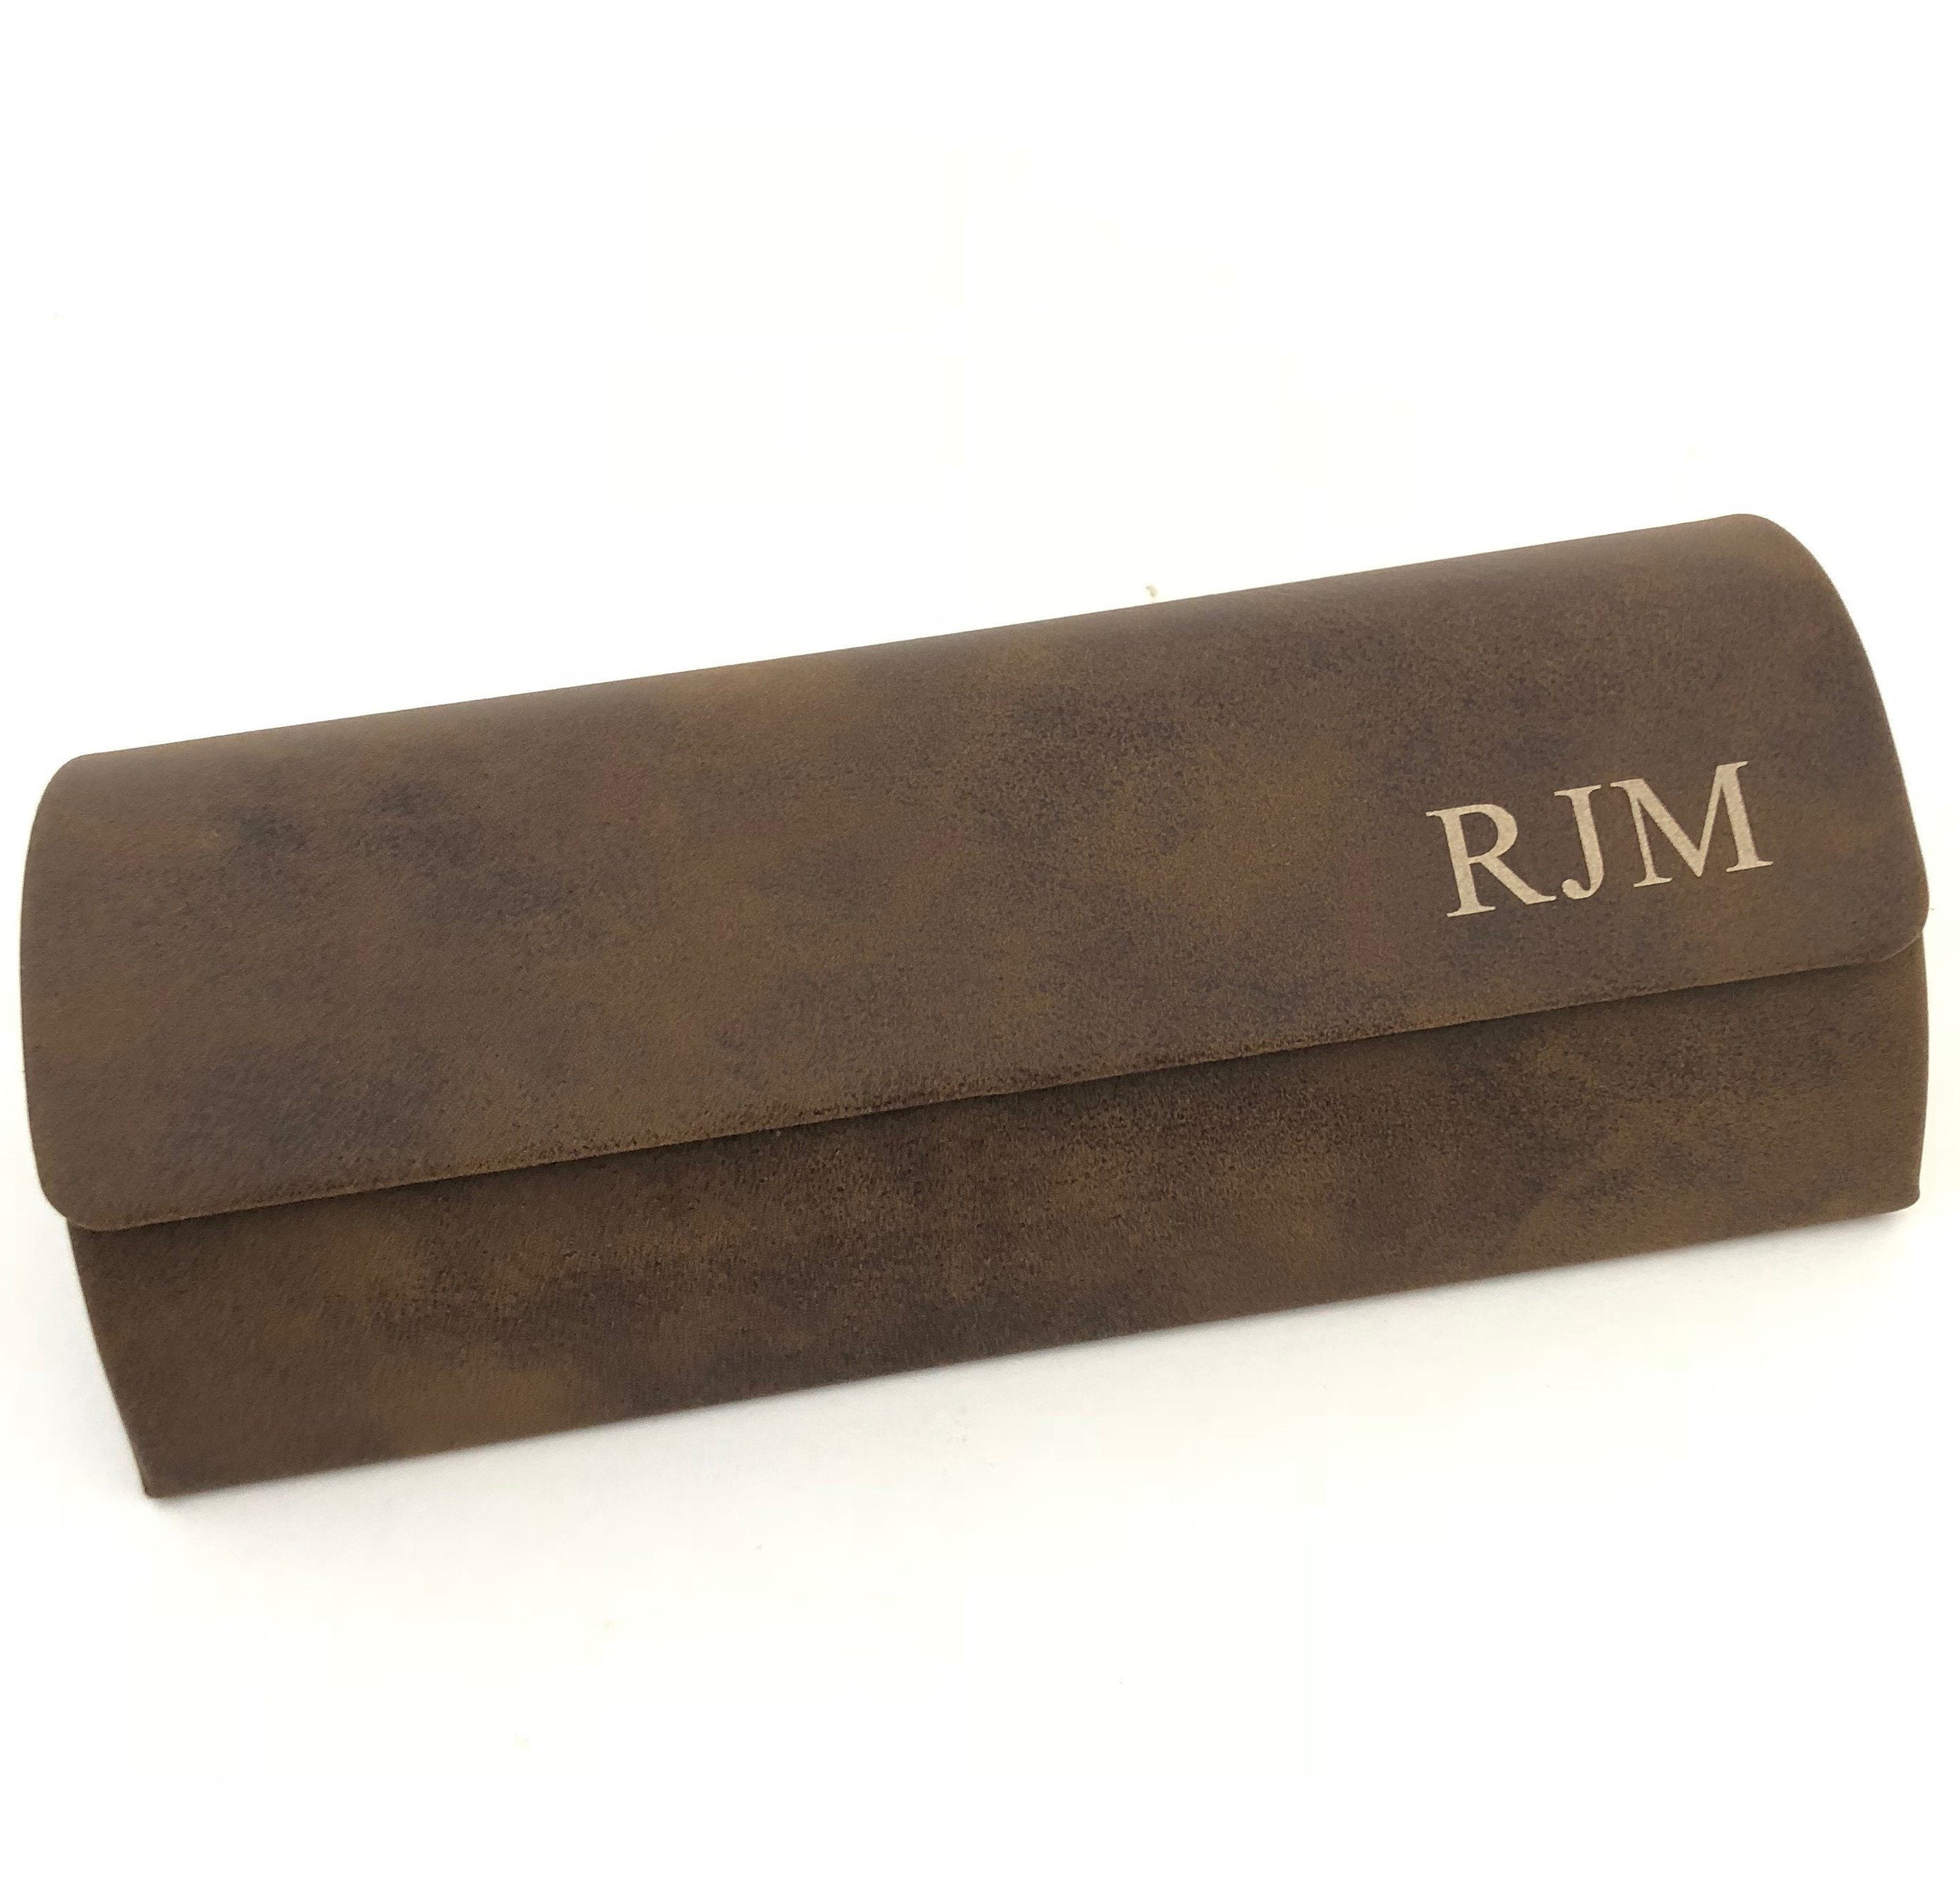 Personalized Glasses Case Custom Laser Engraved with Monogram